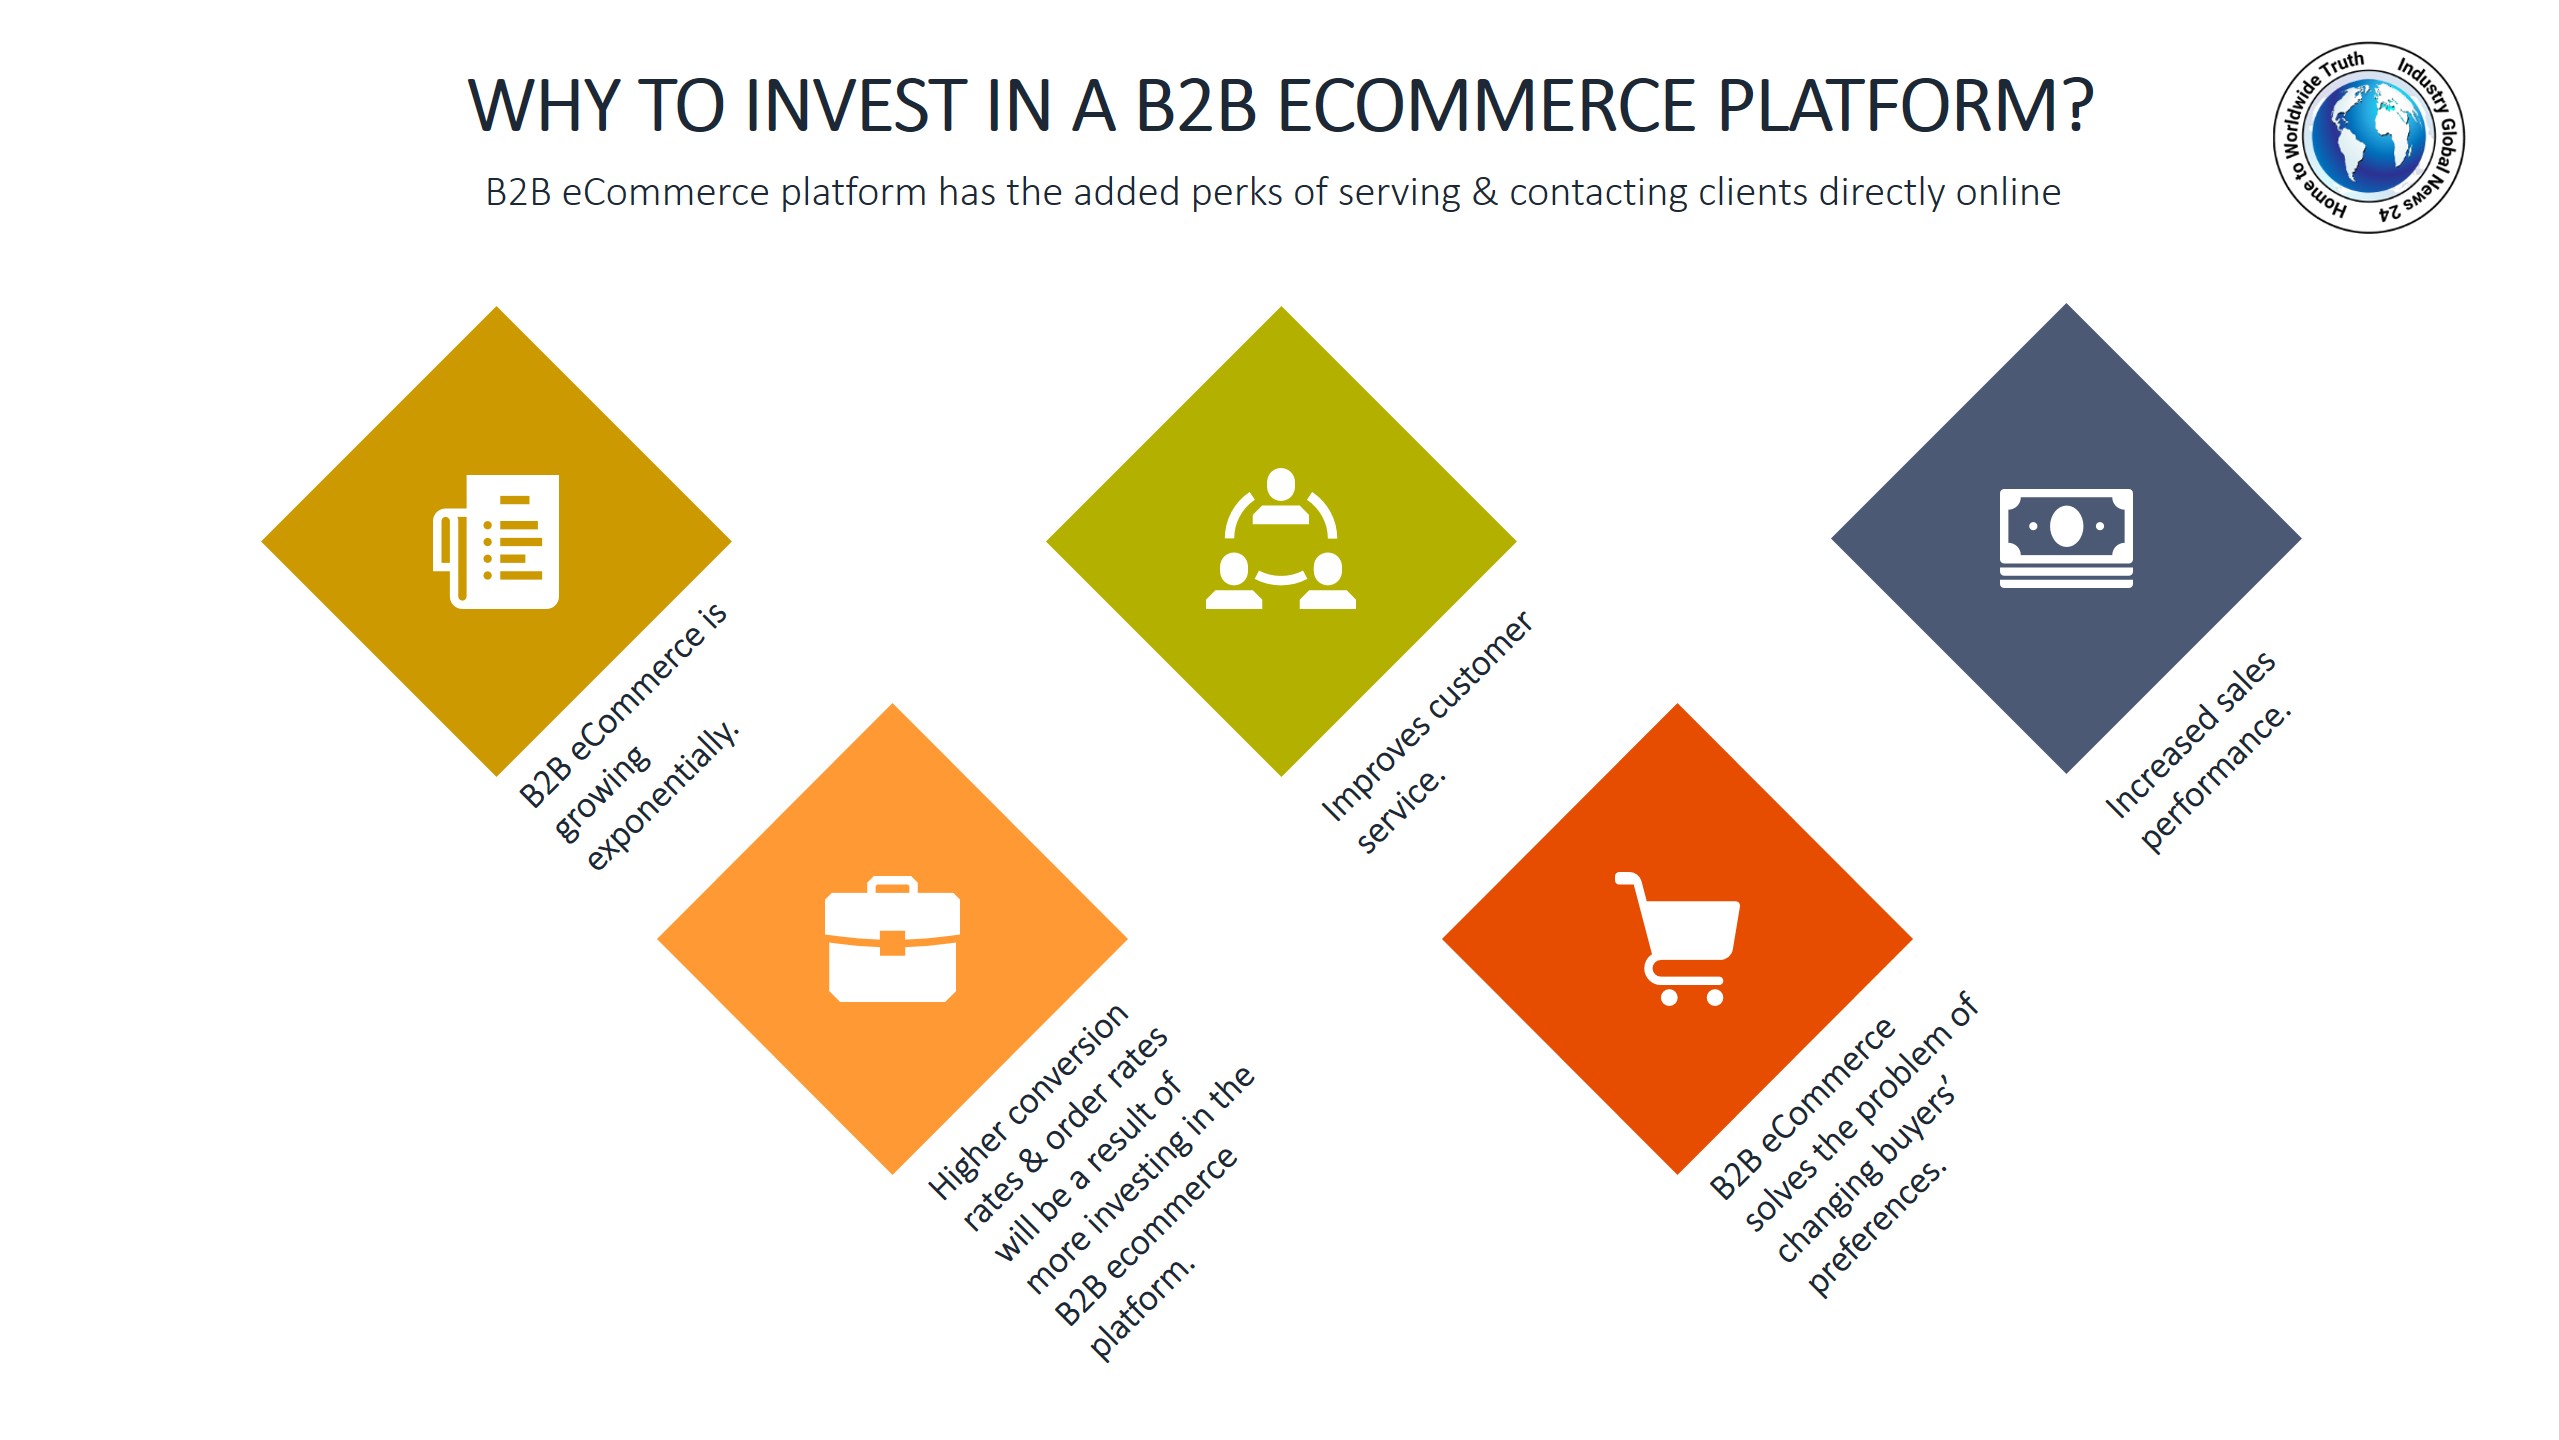 Why to invest in a B2B ecommerce platform